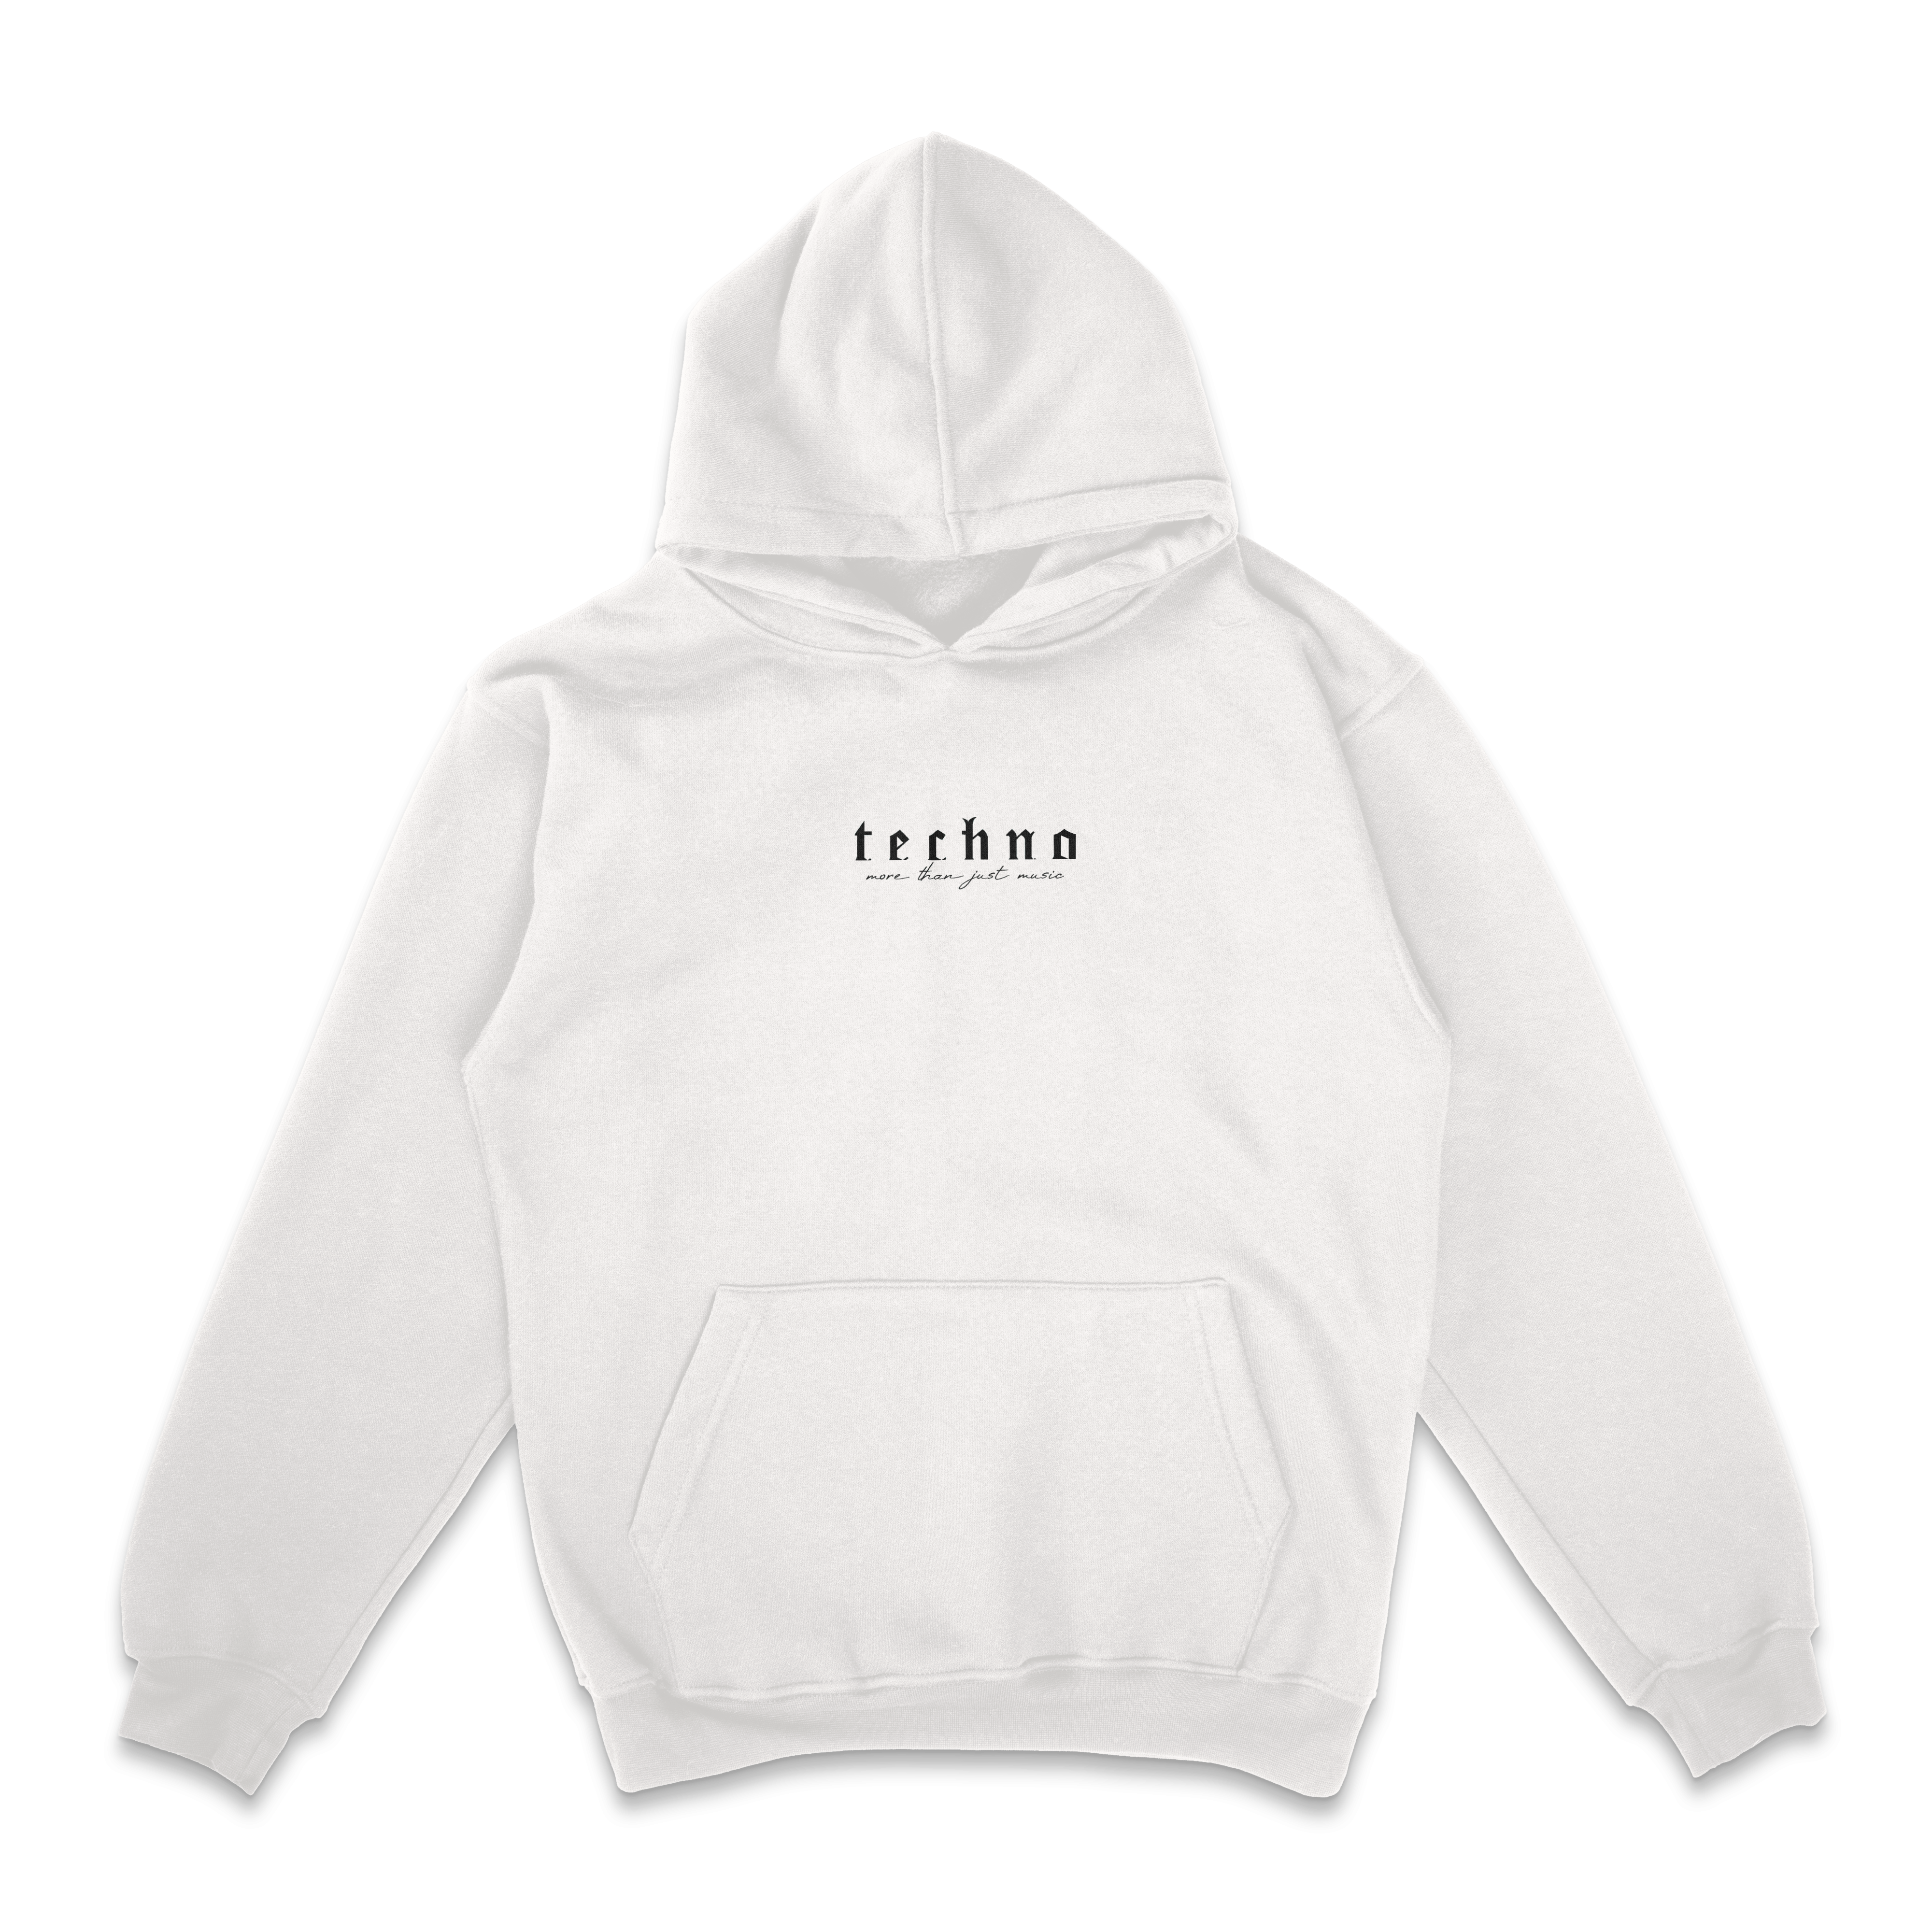 more than just music - Oversized Hoodie Unisex